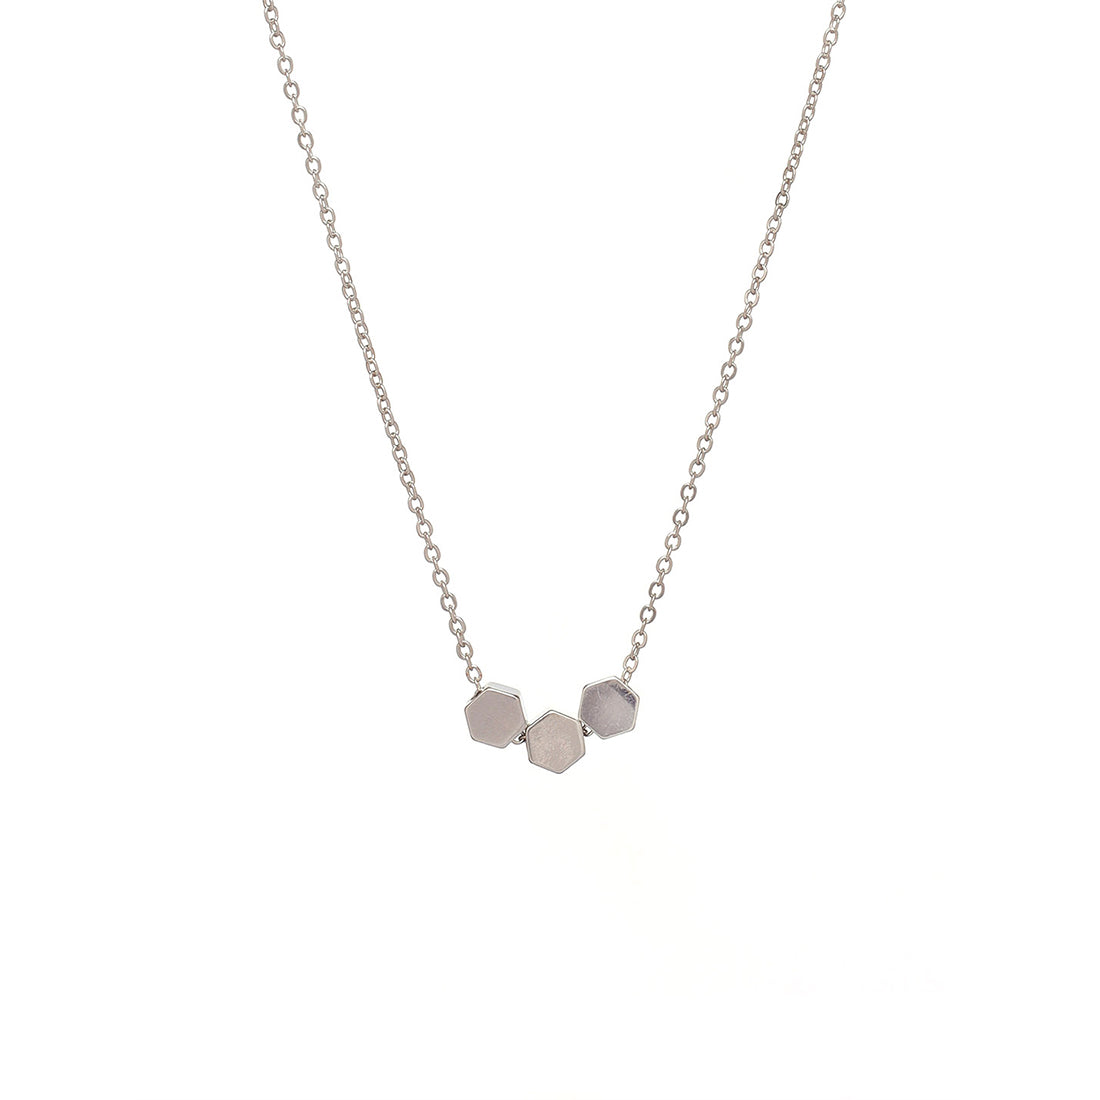 Single Layer Dainty Silver Necklace - 3 Solid Hexagon Pendants